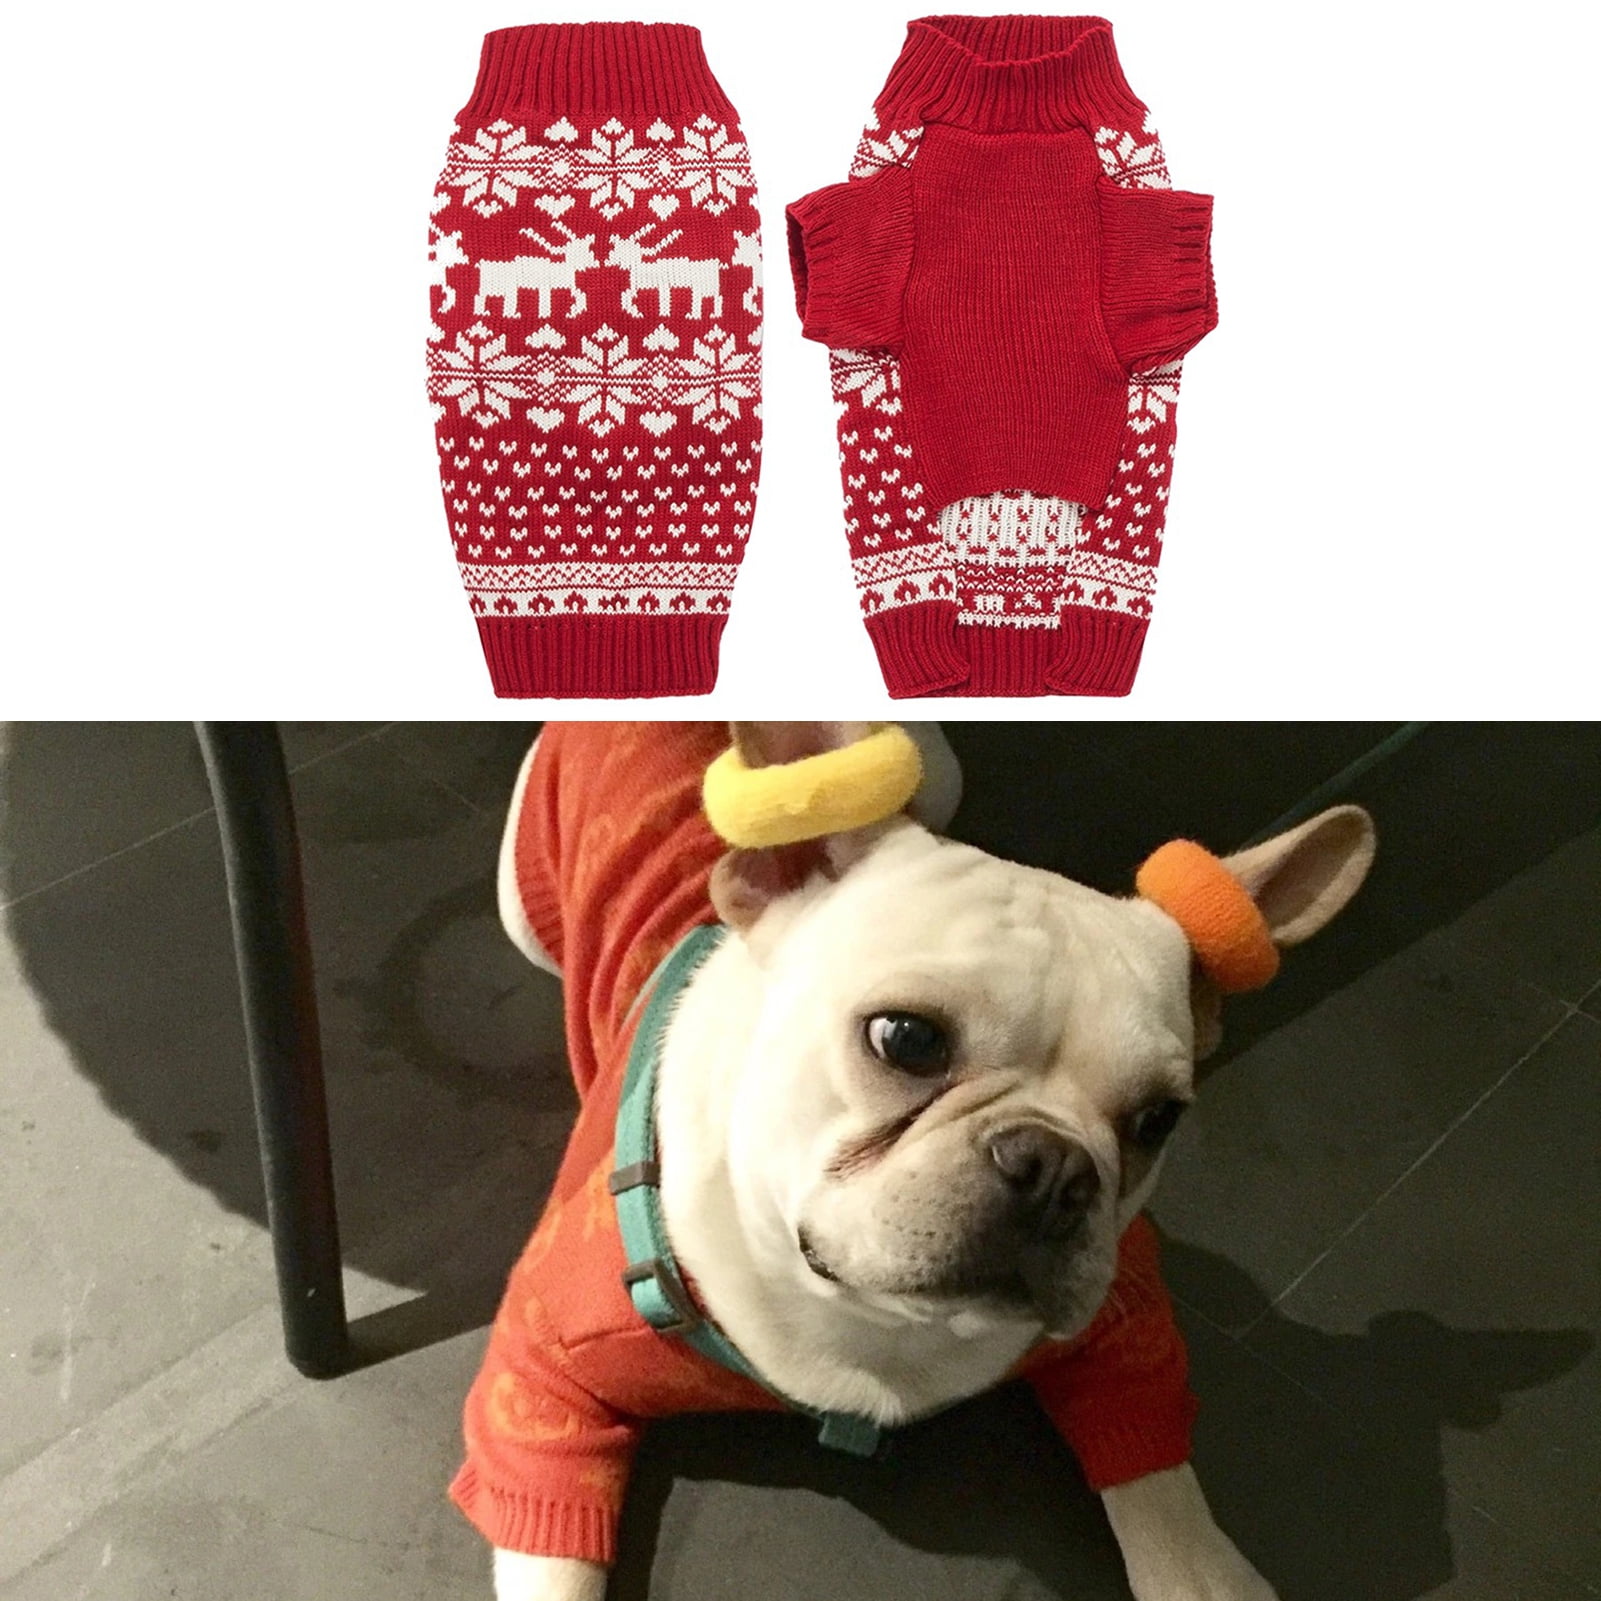 Christmas sweater for cat Dog and Owner Matching Clothes Snowflake jumper for dog Red snowflake motif sweater for dog Red dog pullover